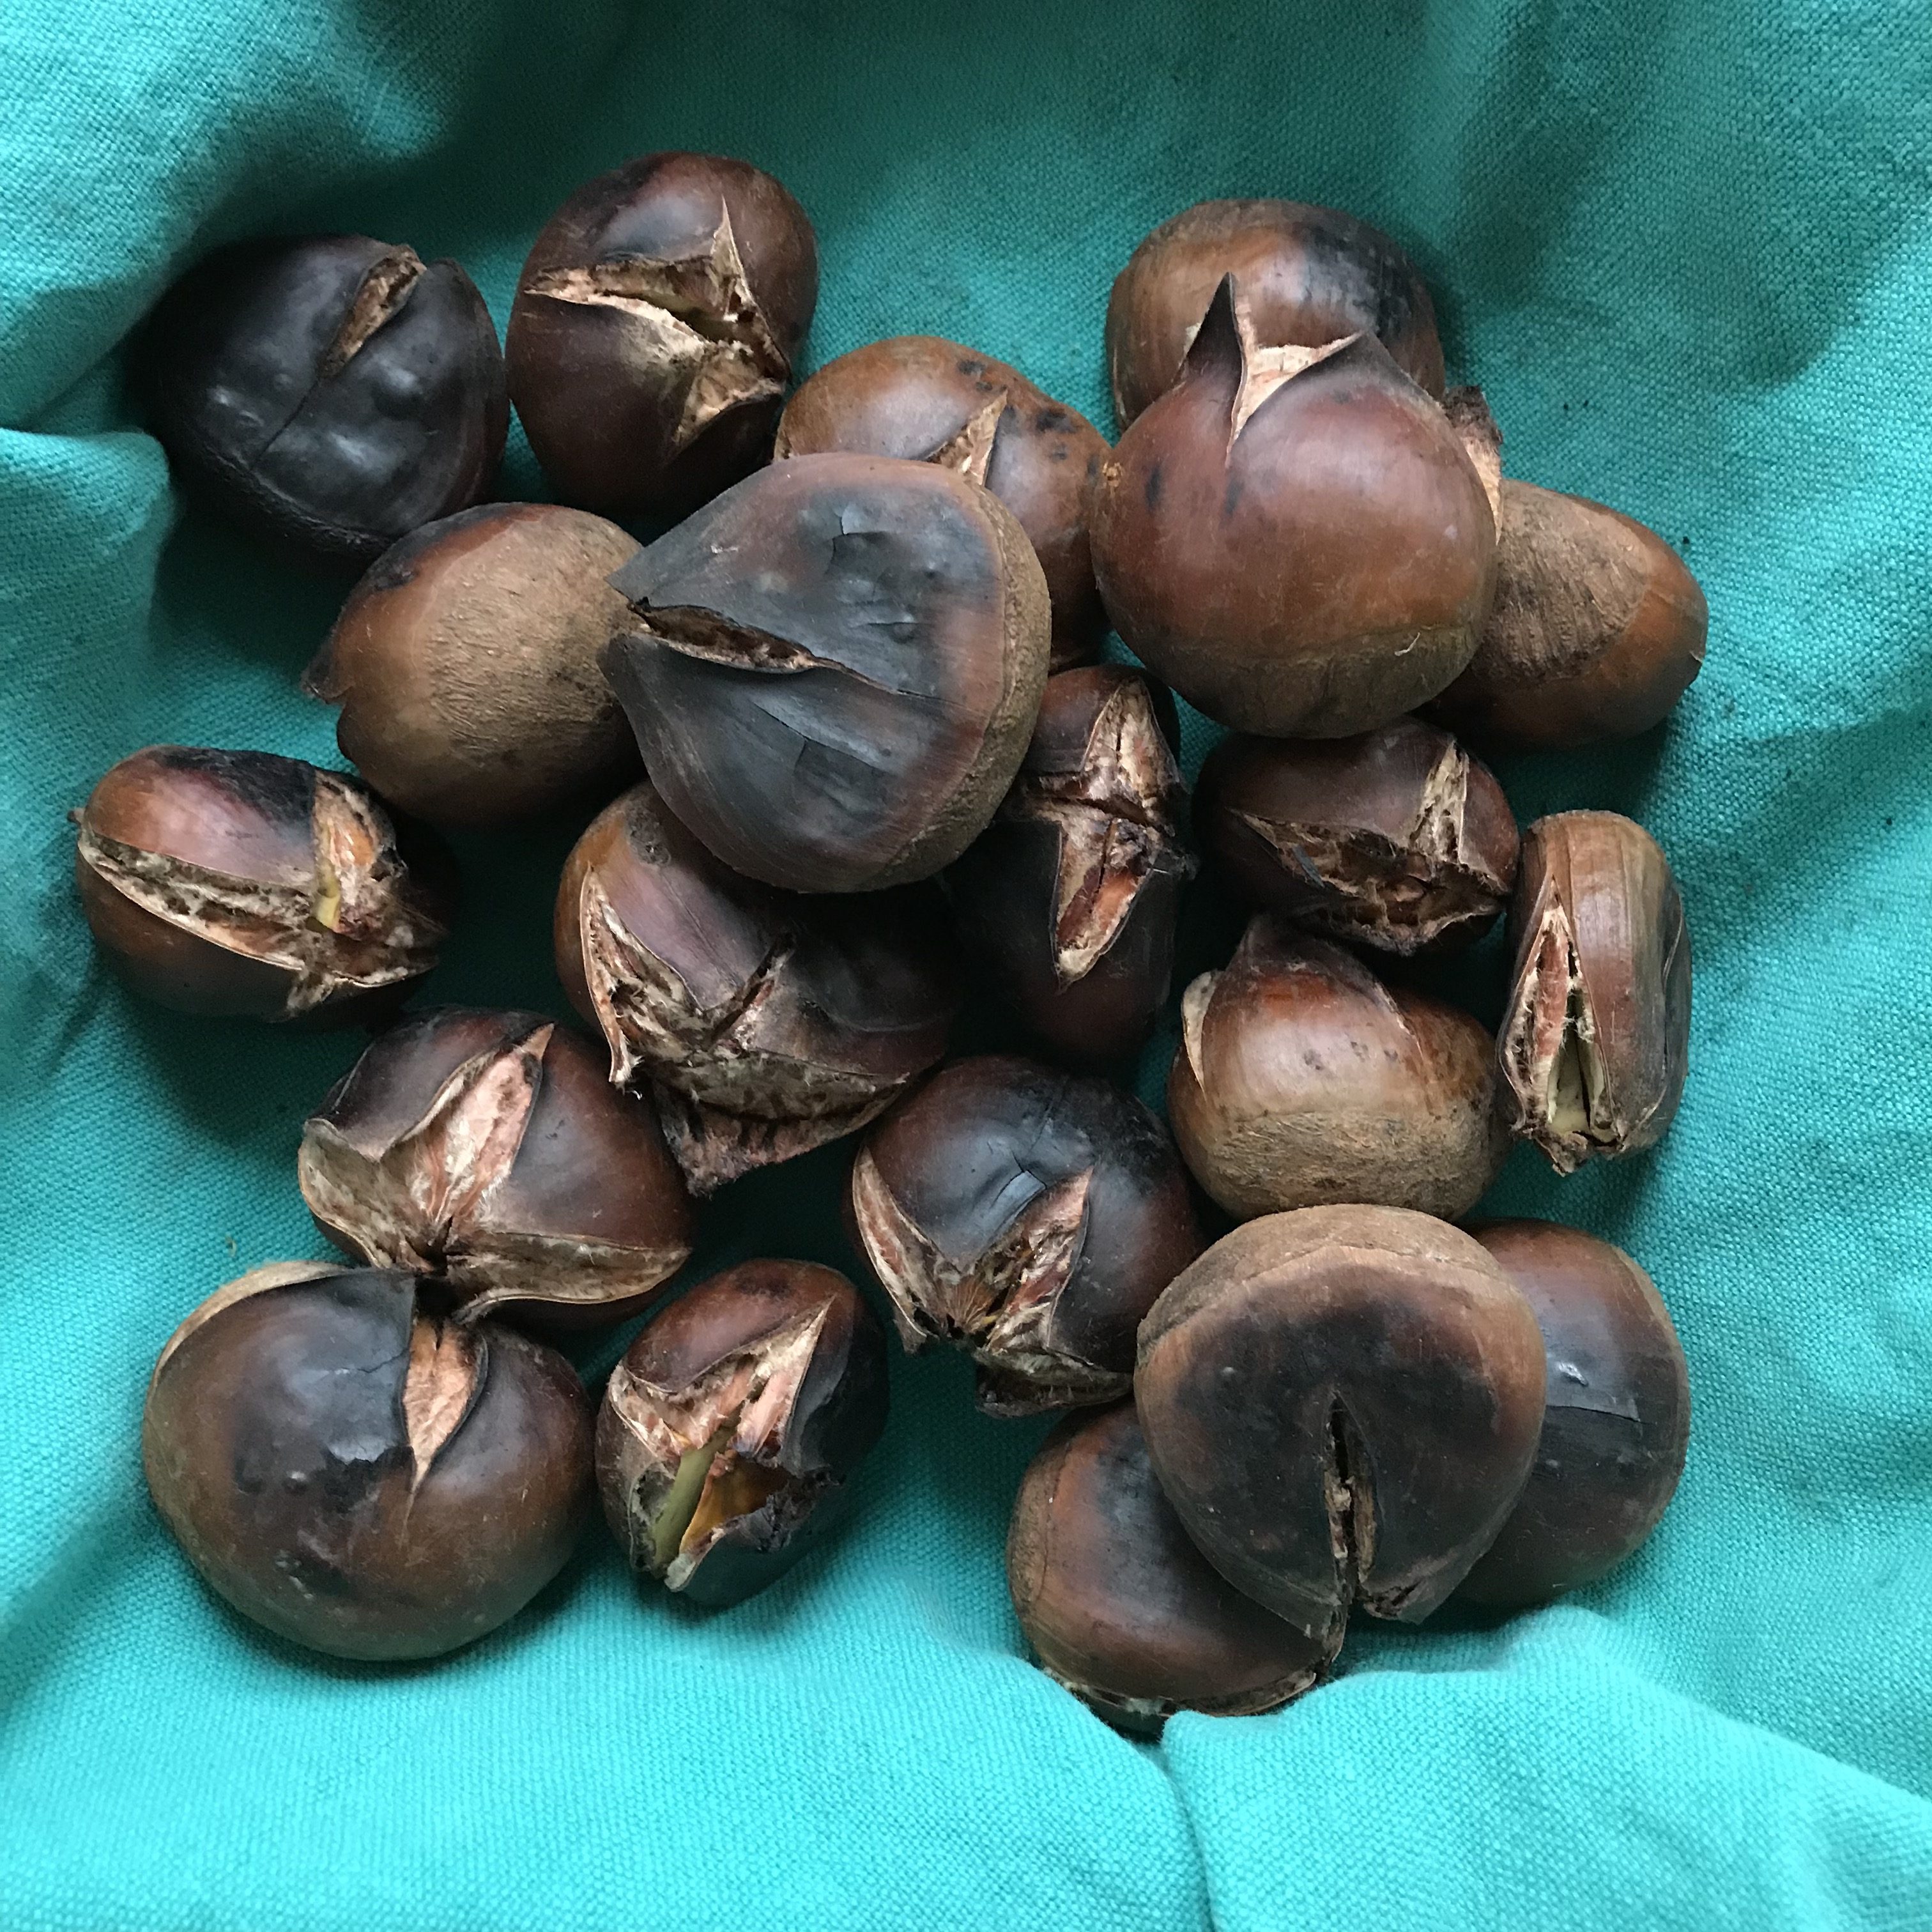 Chestnuts roasted on an open hob